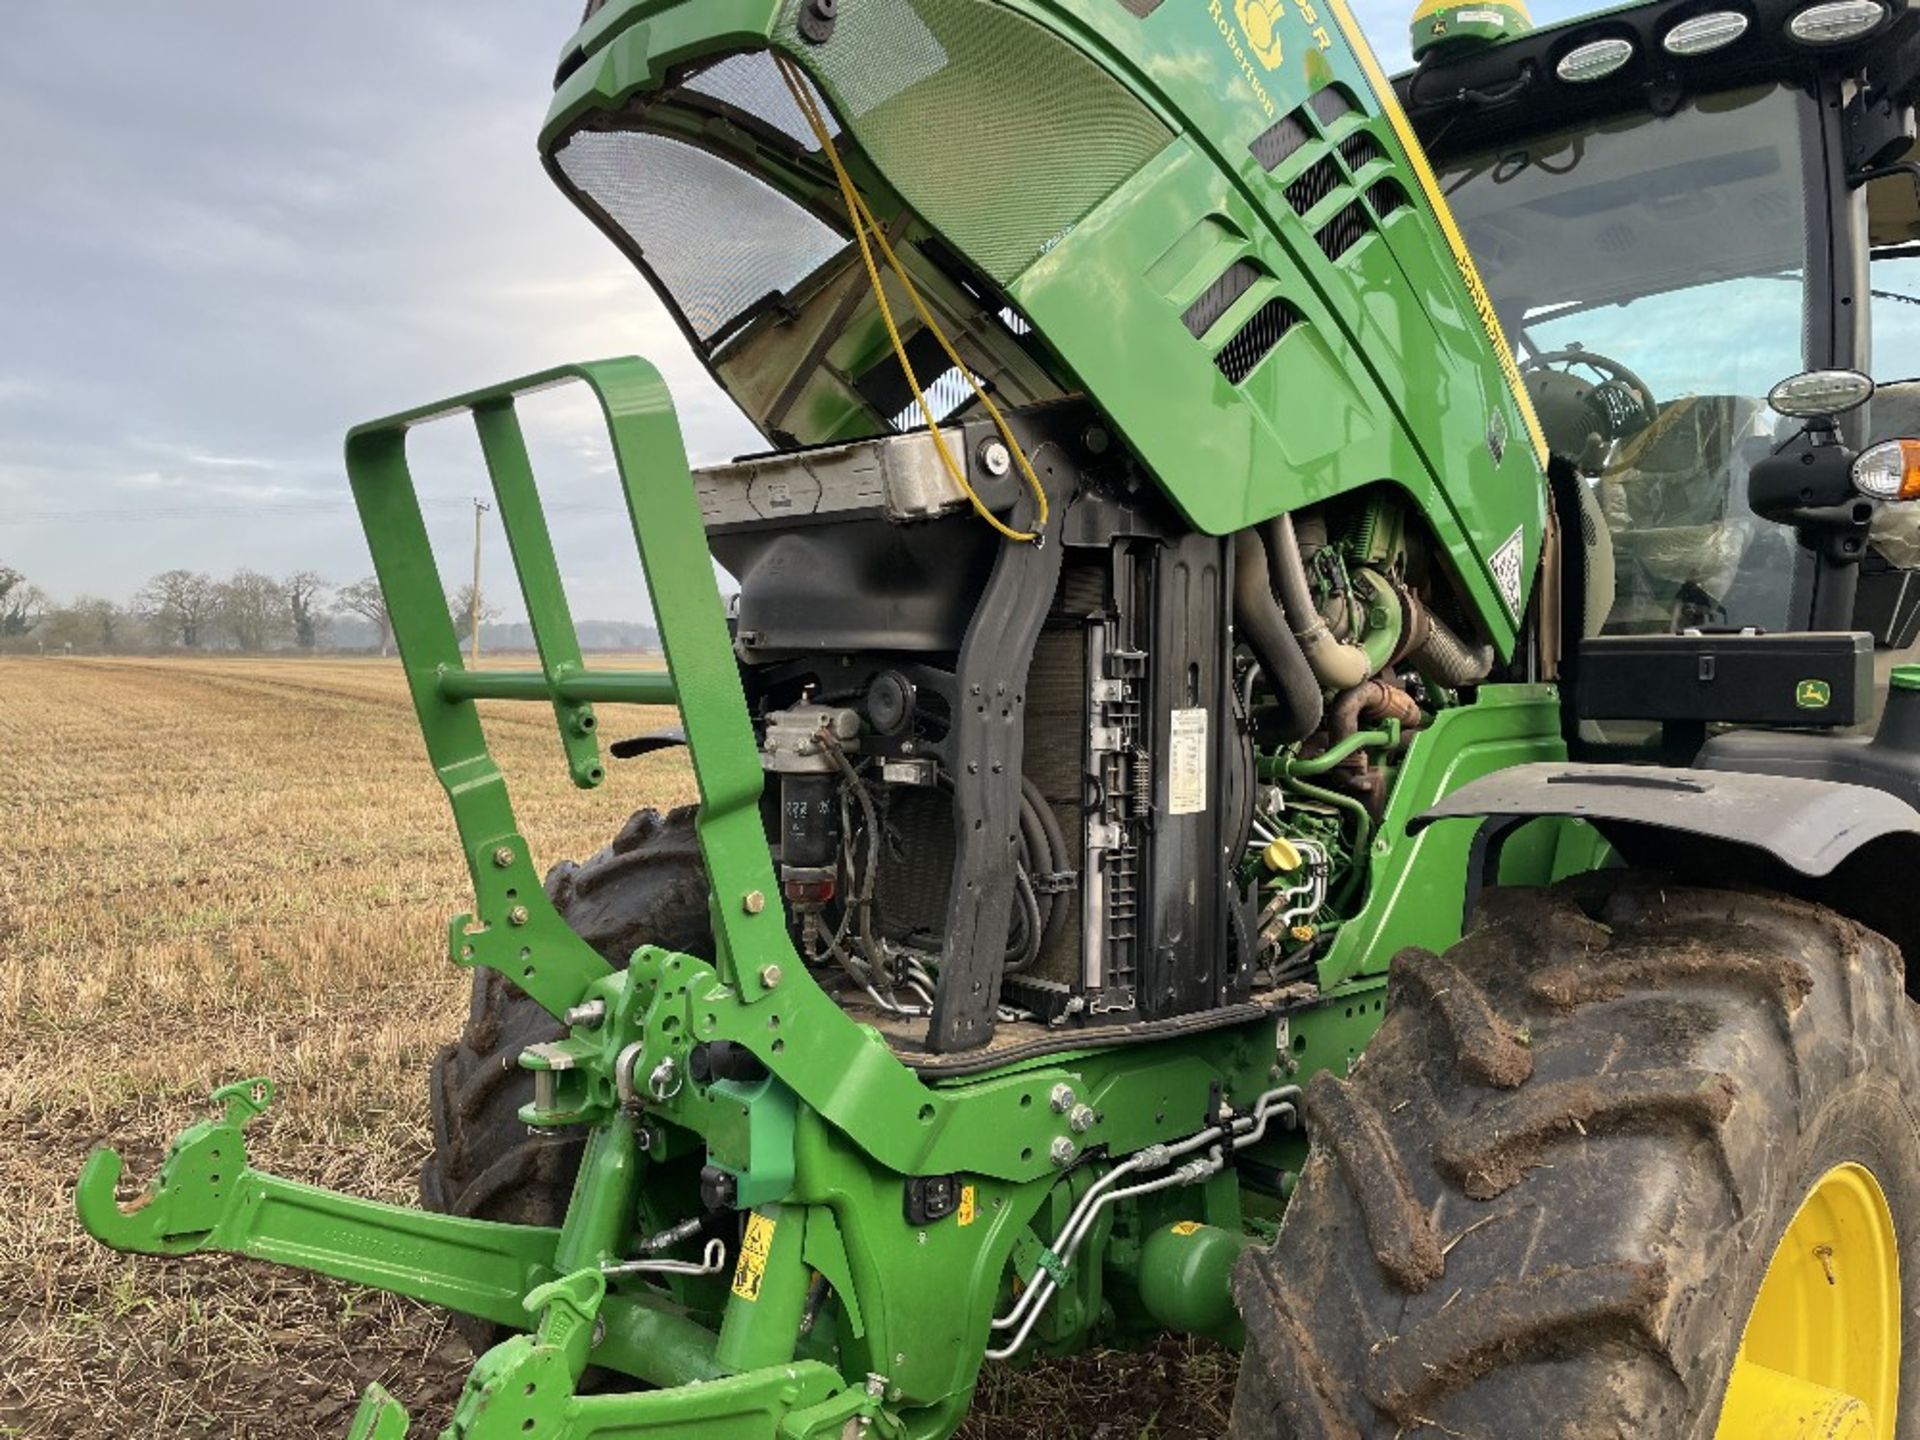 2018 John Deere 6195R 4wd Tractor (Ultimate Edition), approx. 1848 hours, Reg No. - Image 17 of 19